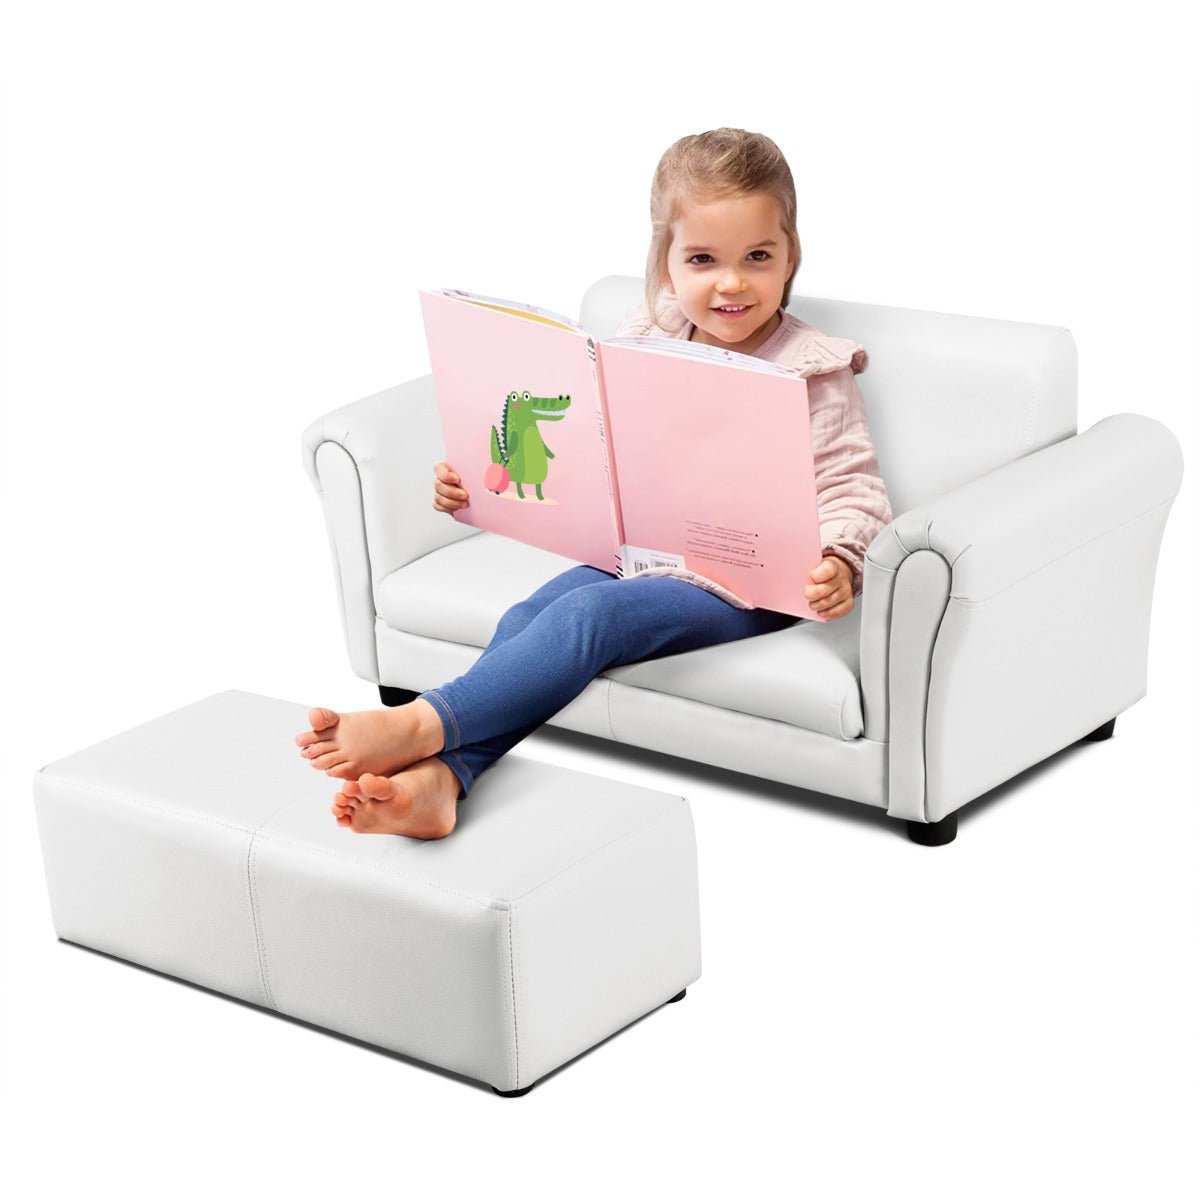 Boys' and Girls' Sofa Set: 2-Seat with Footstool and Durable Wooden Frame